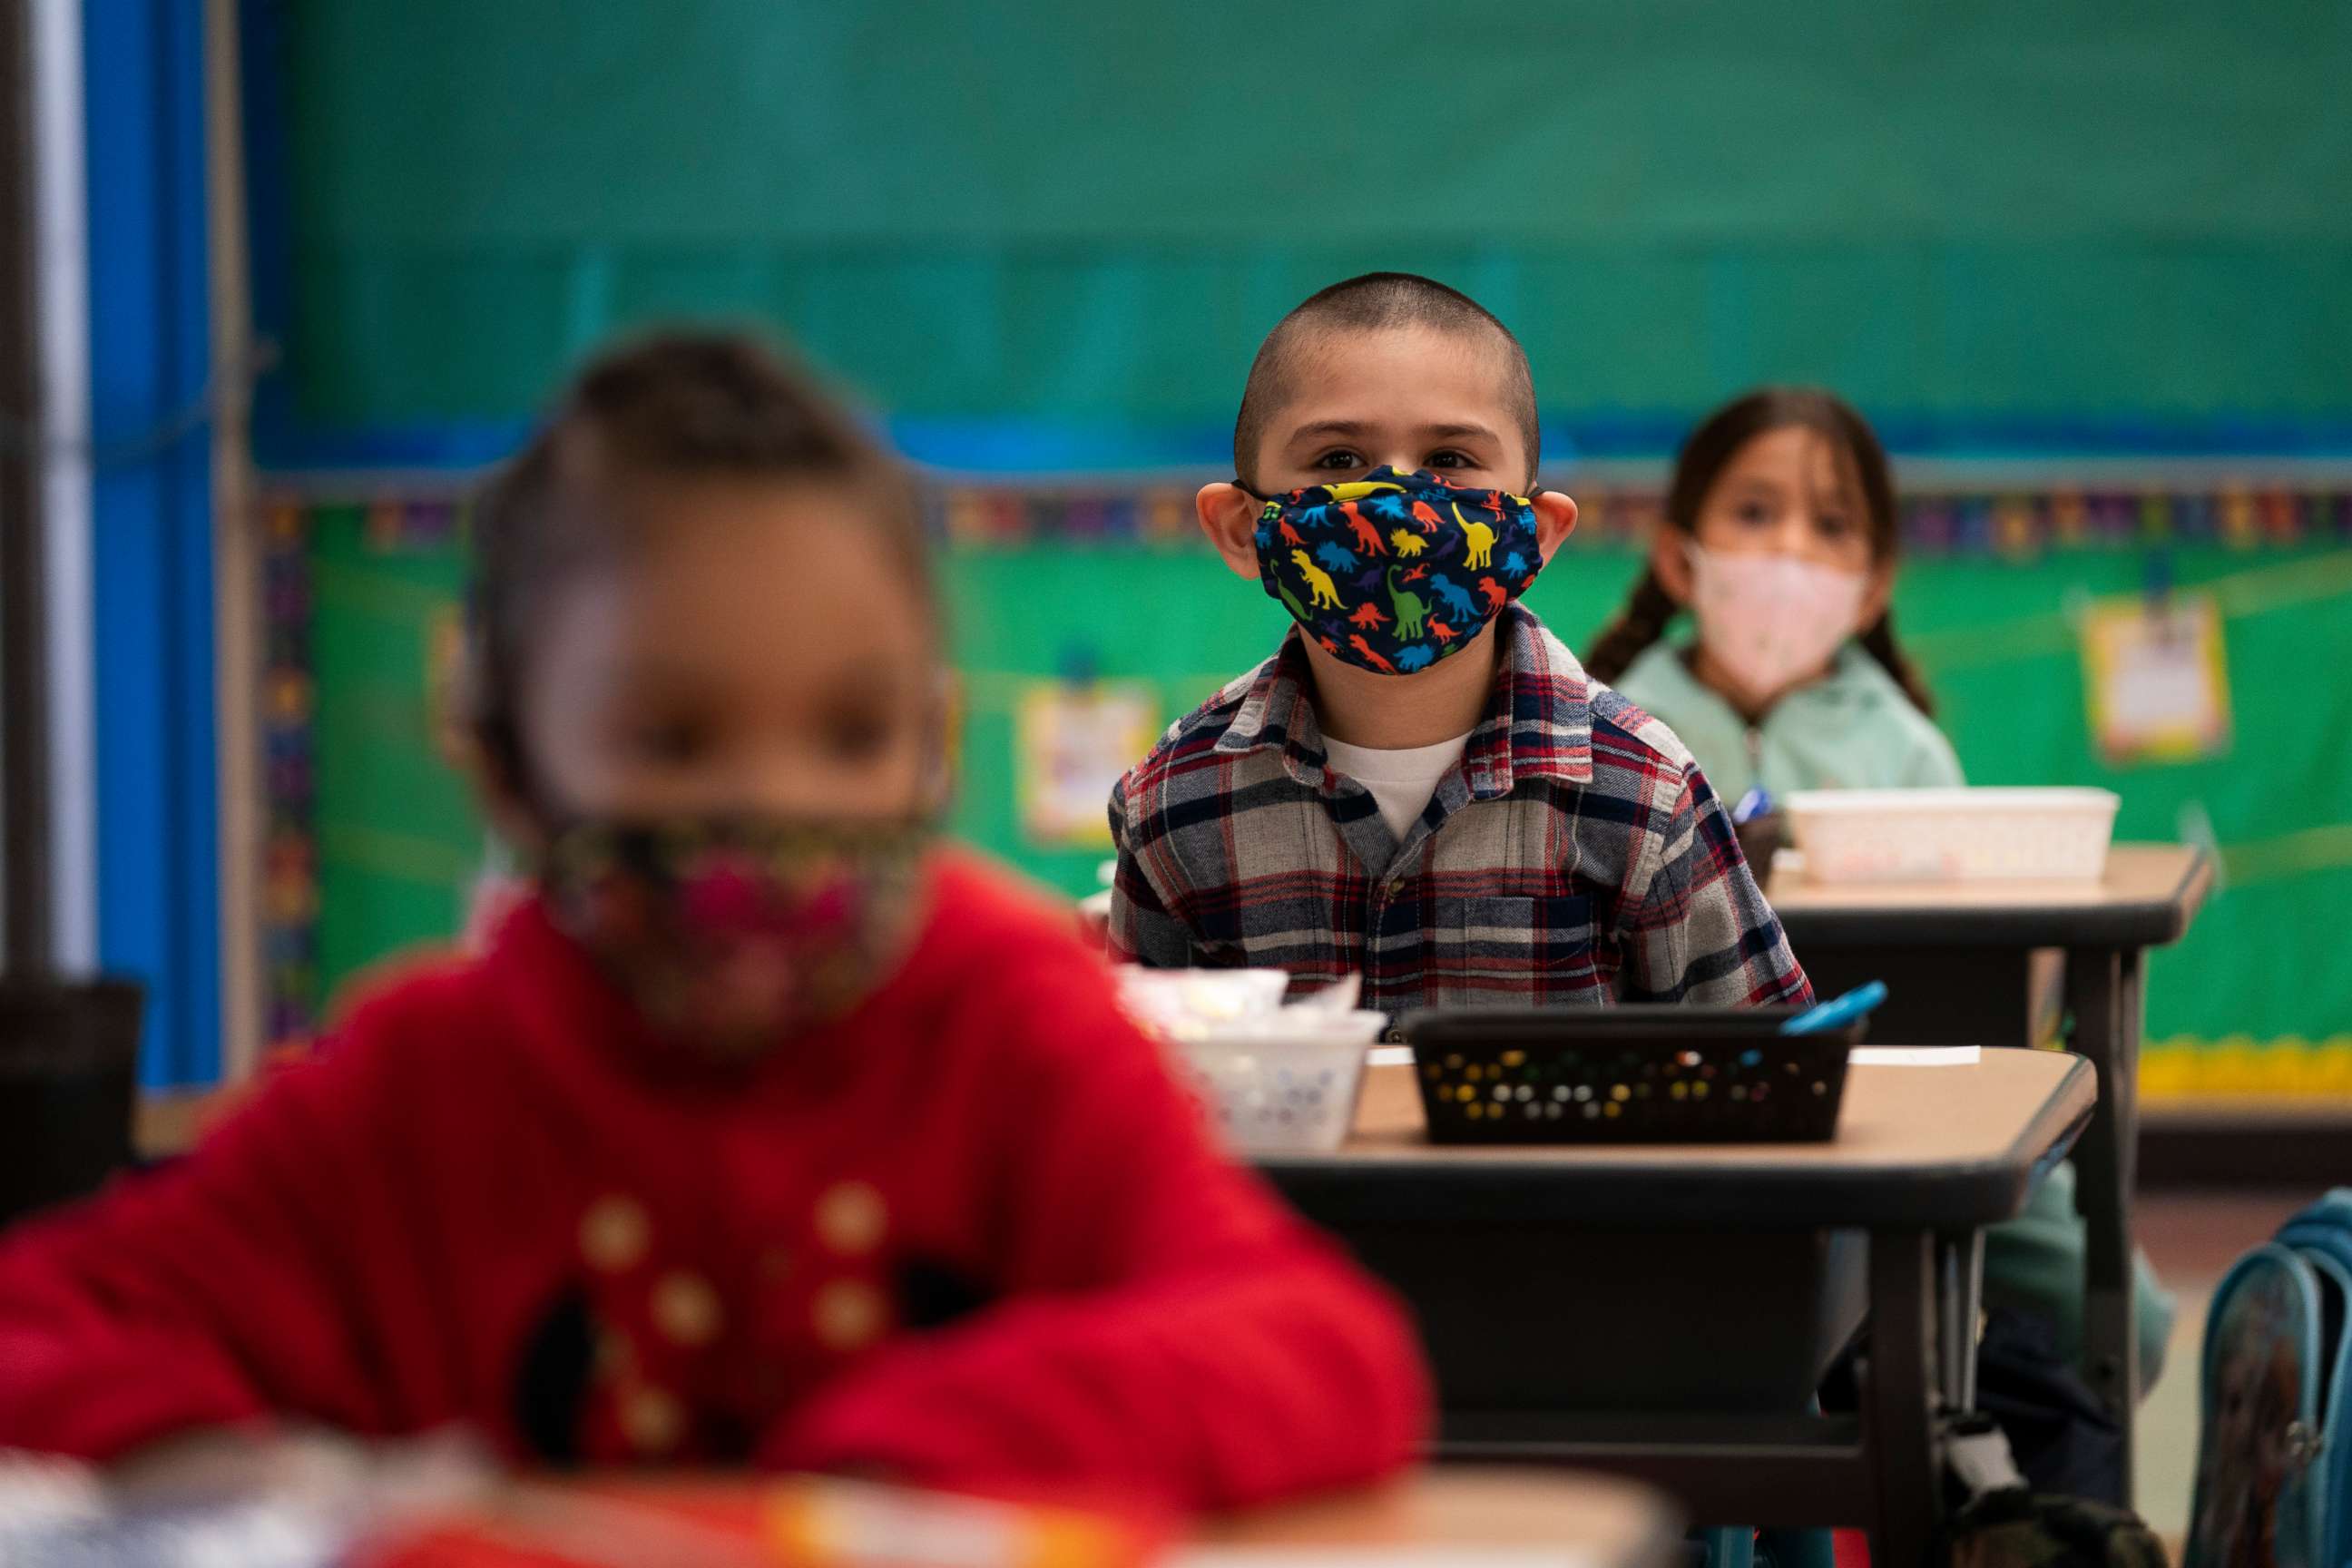 PHOTO: Kindergarten students wearing face masks sit in their classroom on the first day of in-person learning at Maurice Sendak Elementary School in Los Angeles, California, on April 13, 2021, amid the coronavirus pandemic.